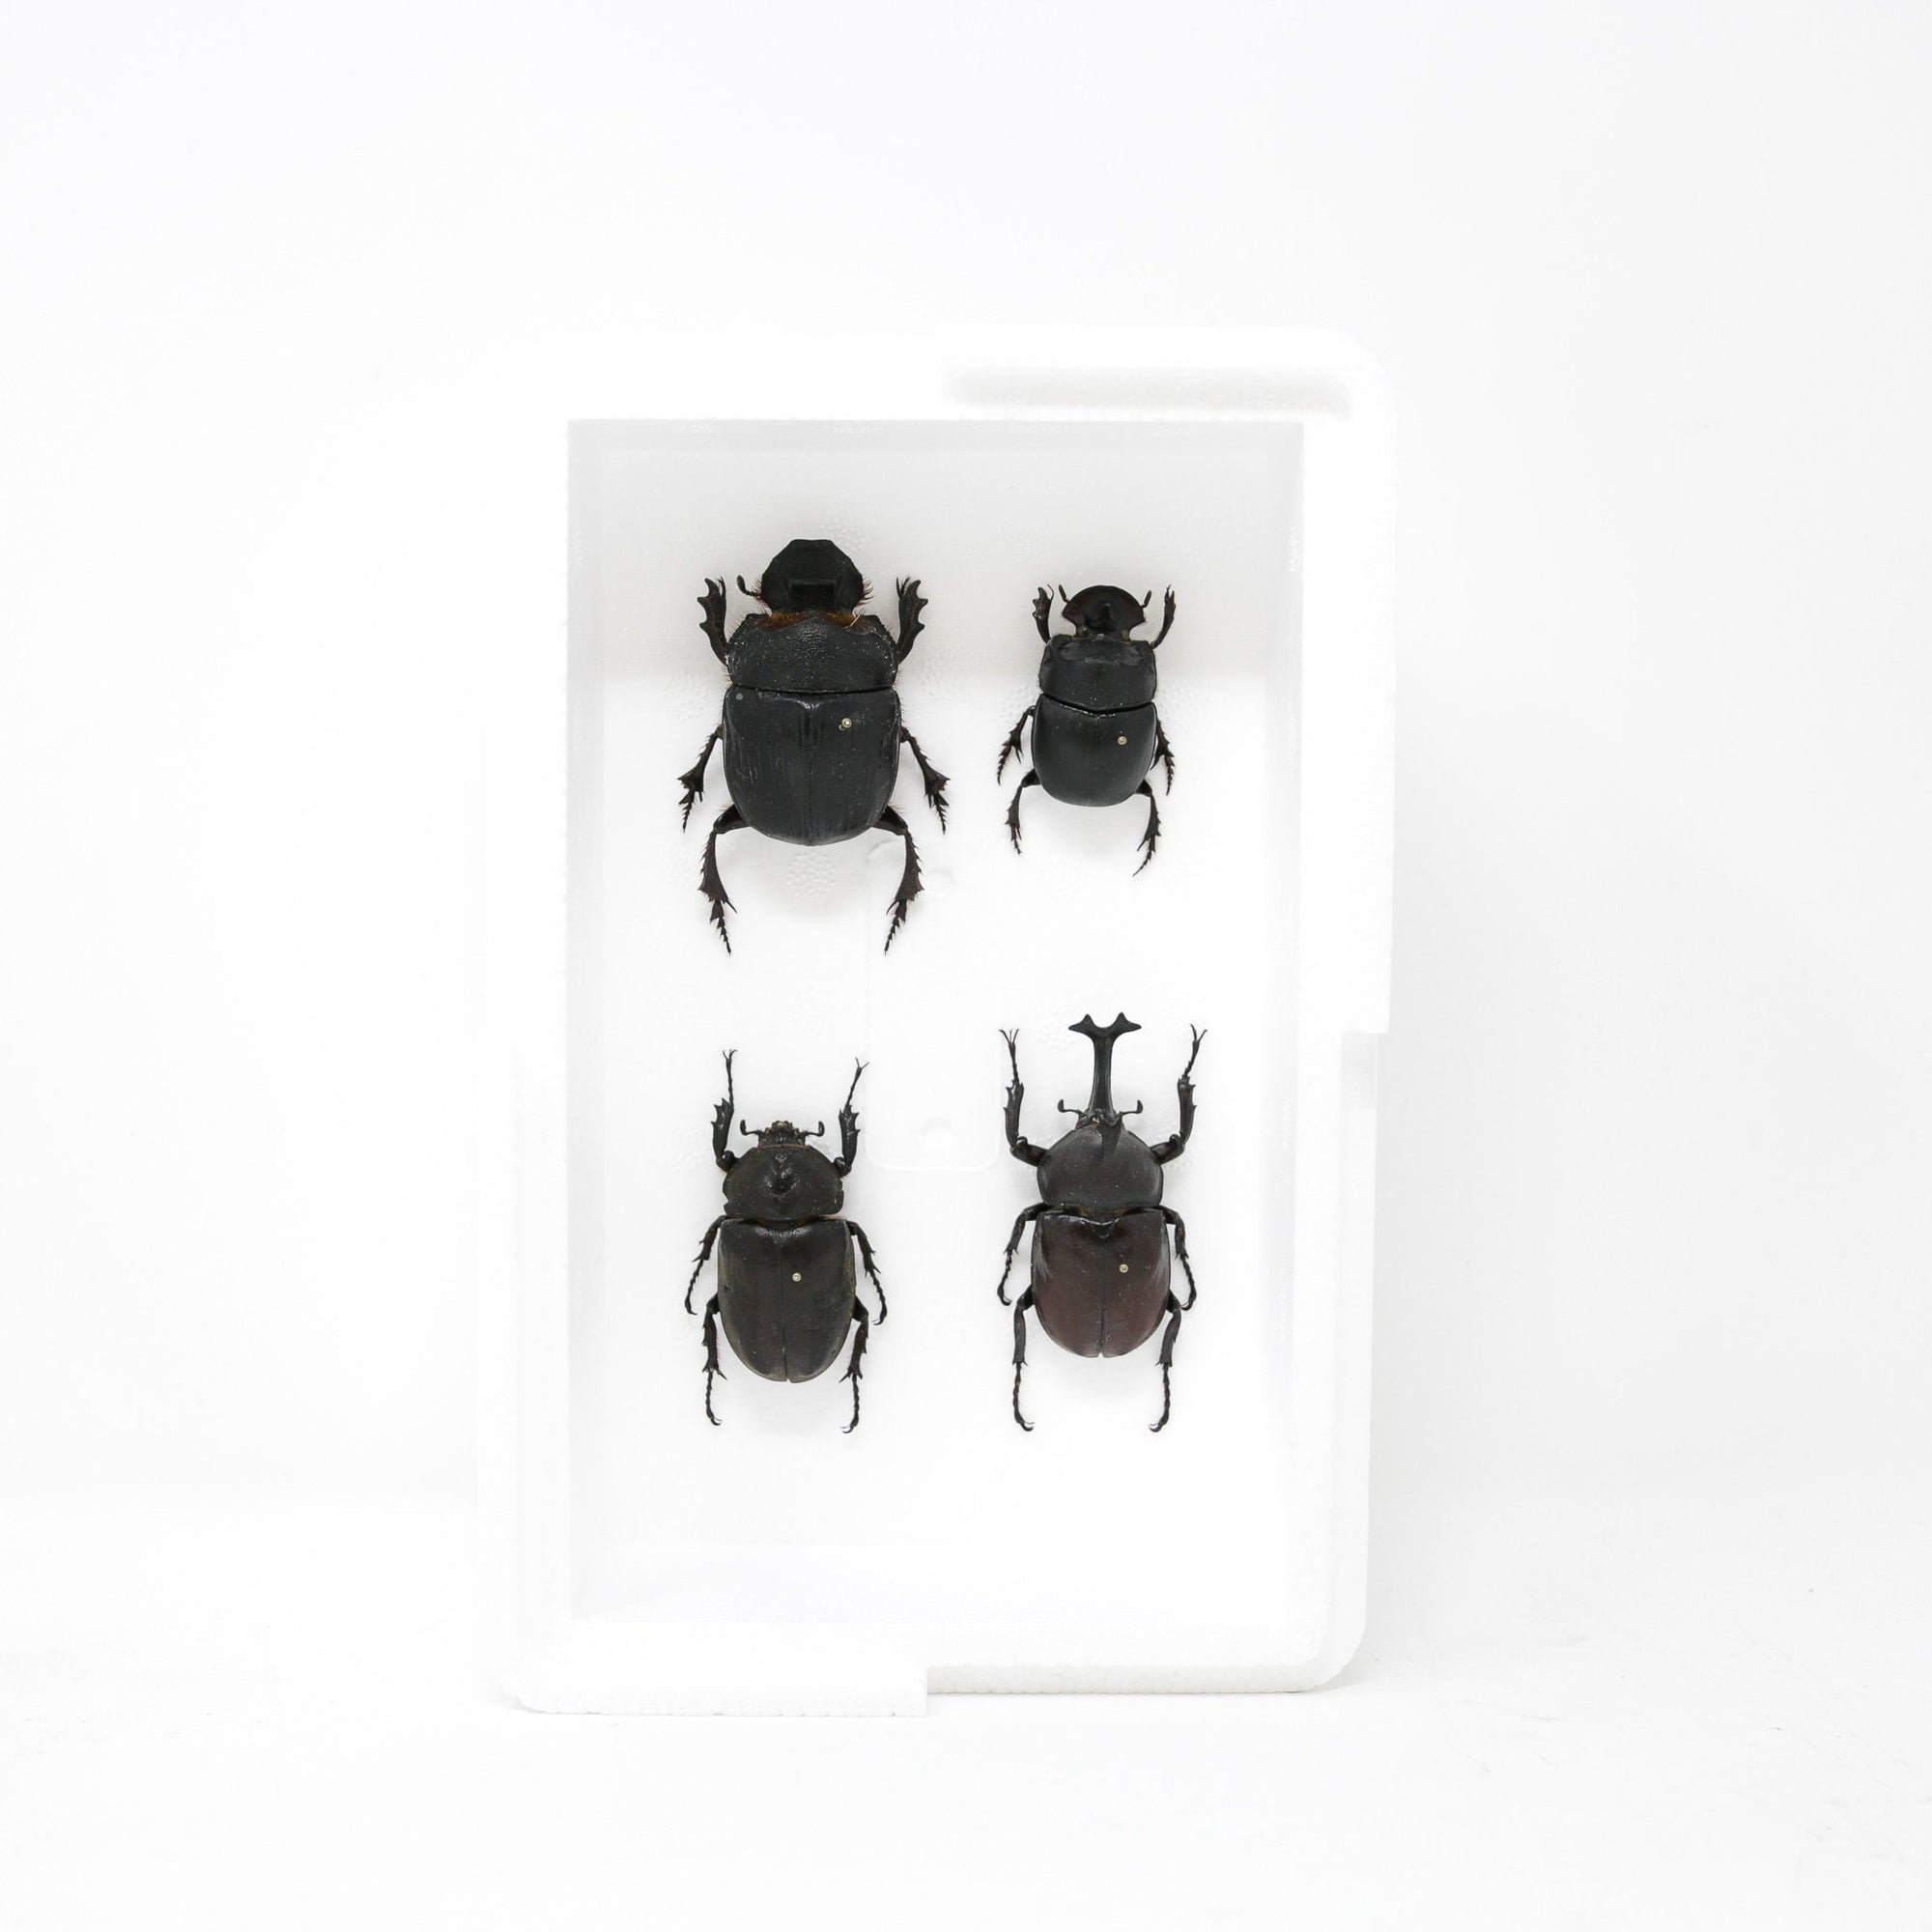 Giant Scarabs & Rhino Beetles Collection, Inc. Scientific Collection Data, A1 Quality, Entomology, Real Insect Specimens (#16)